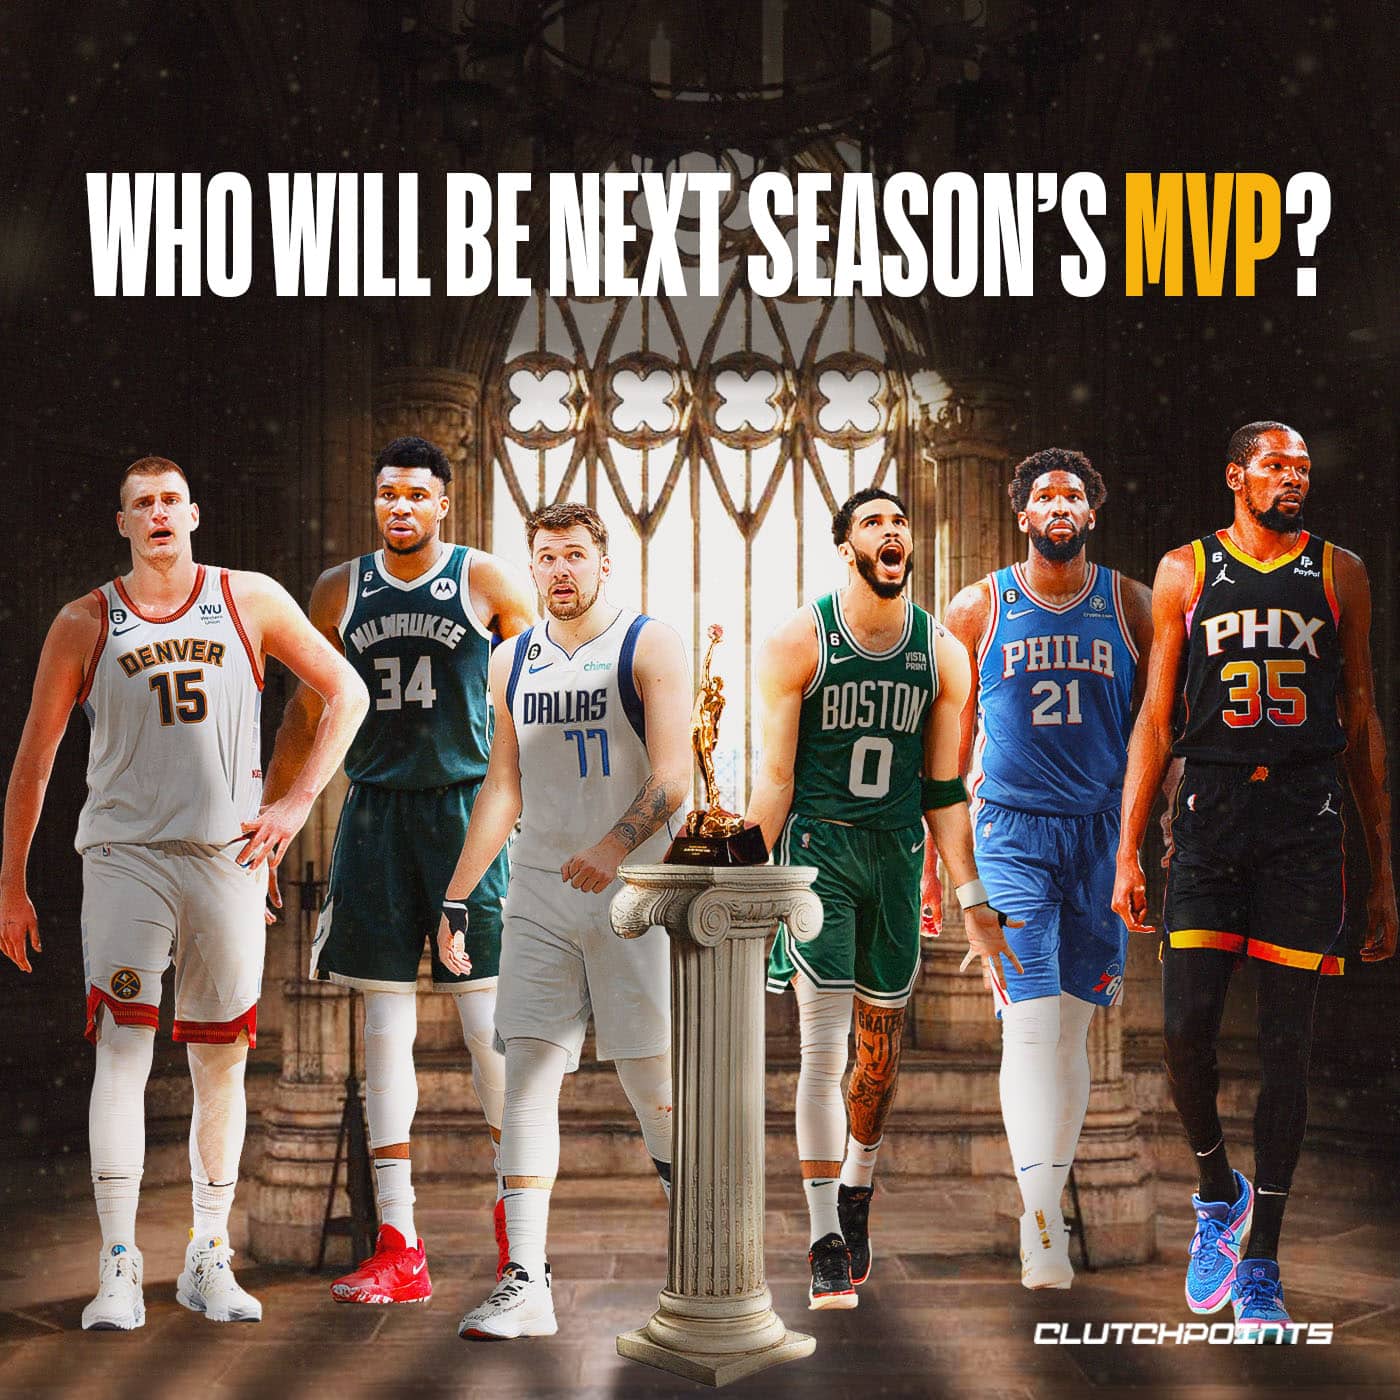 Who does the EMS think will be awarded NBAs MVP award?